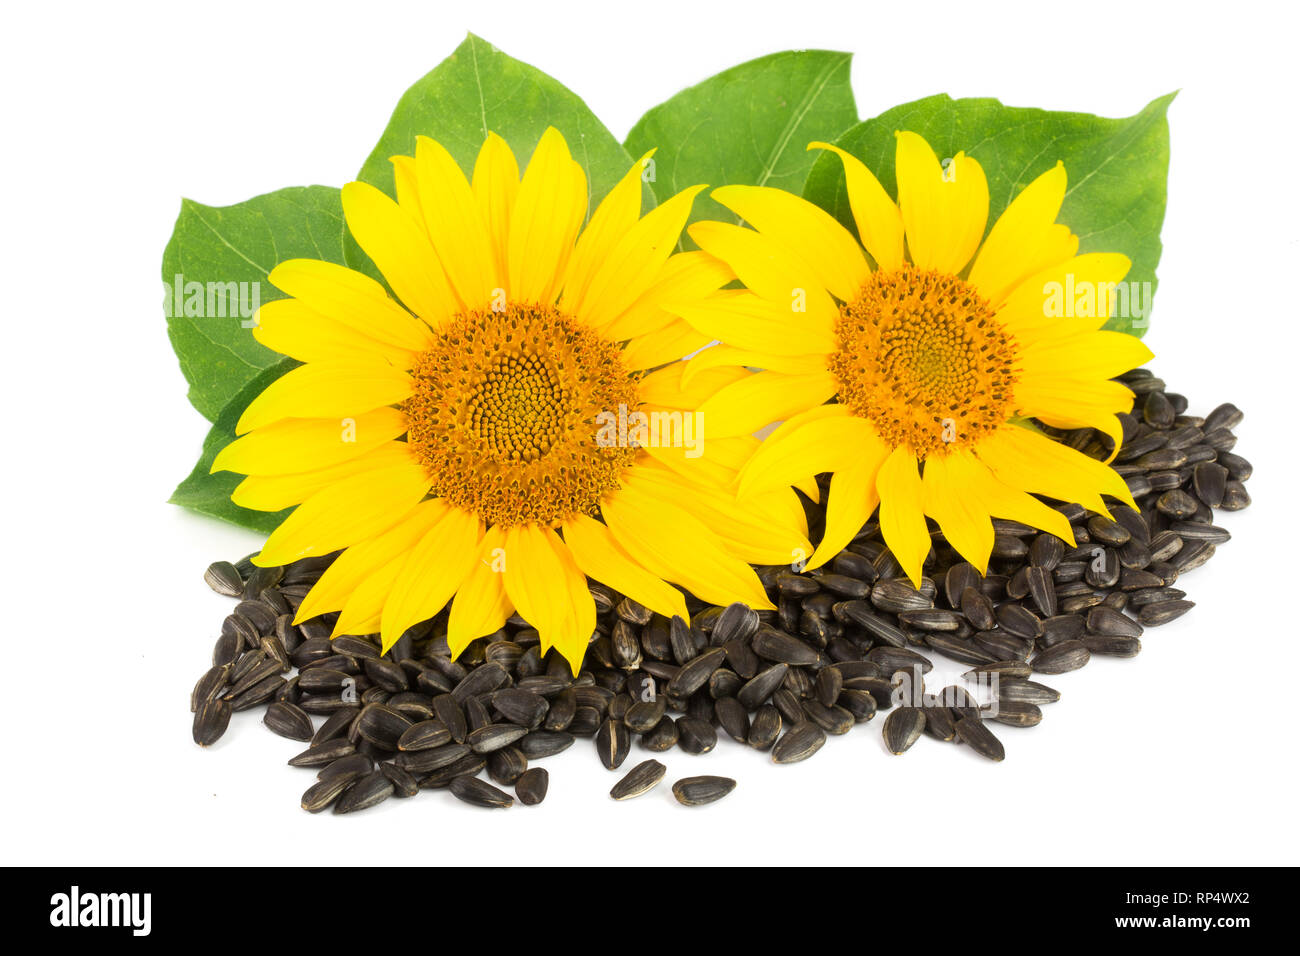 Two sunflowers with seeds and leaves isolated on white background. Stock Photo